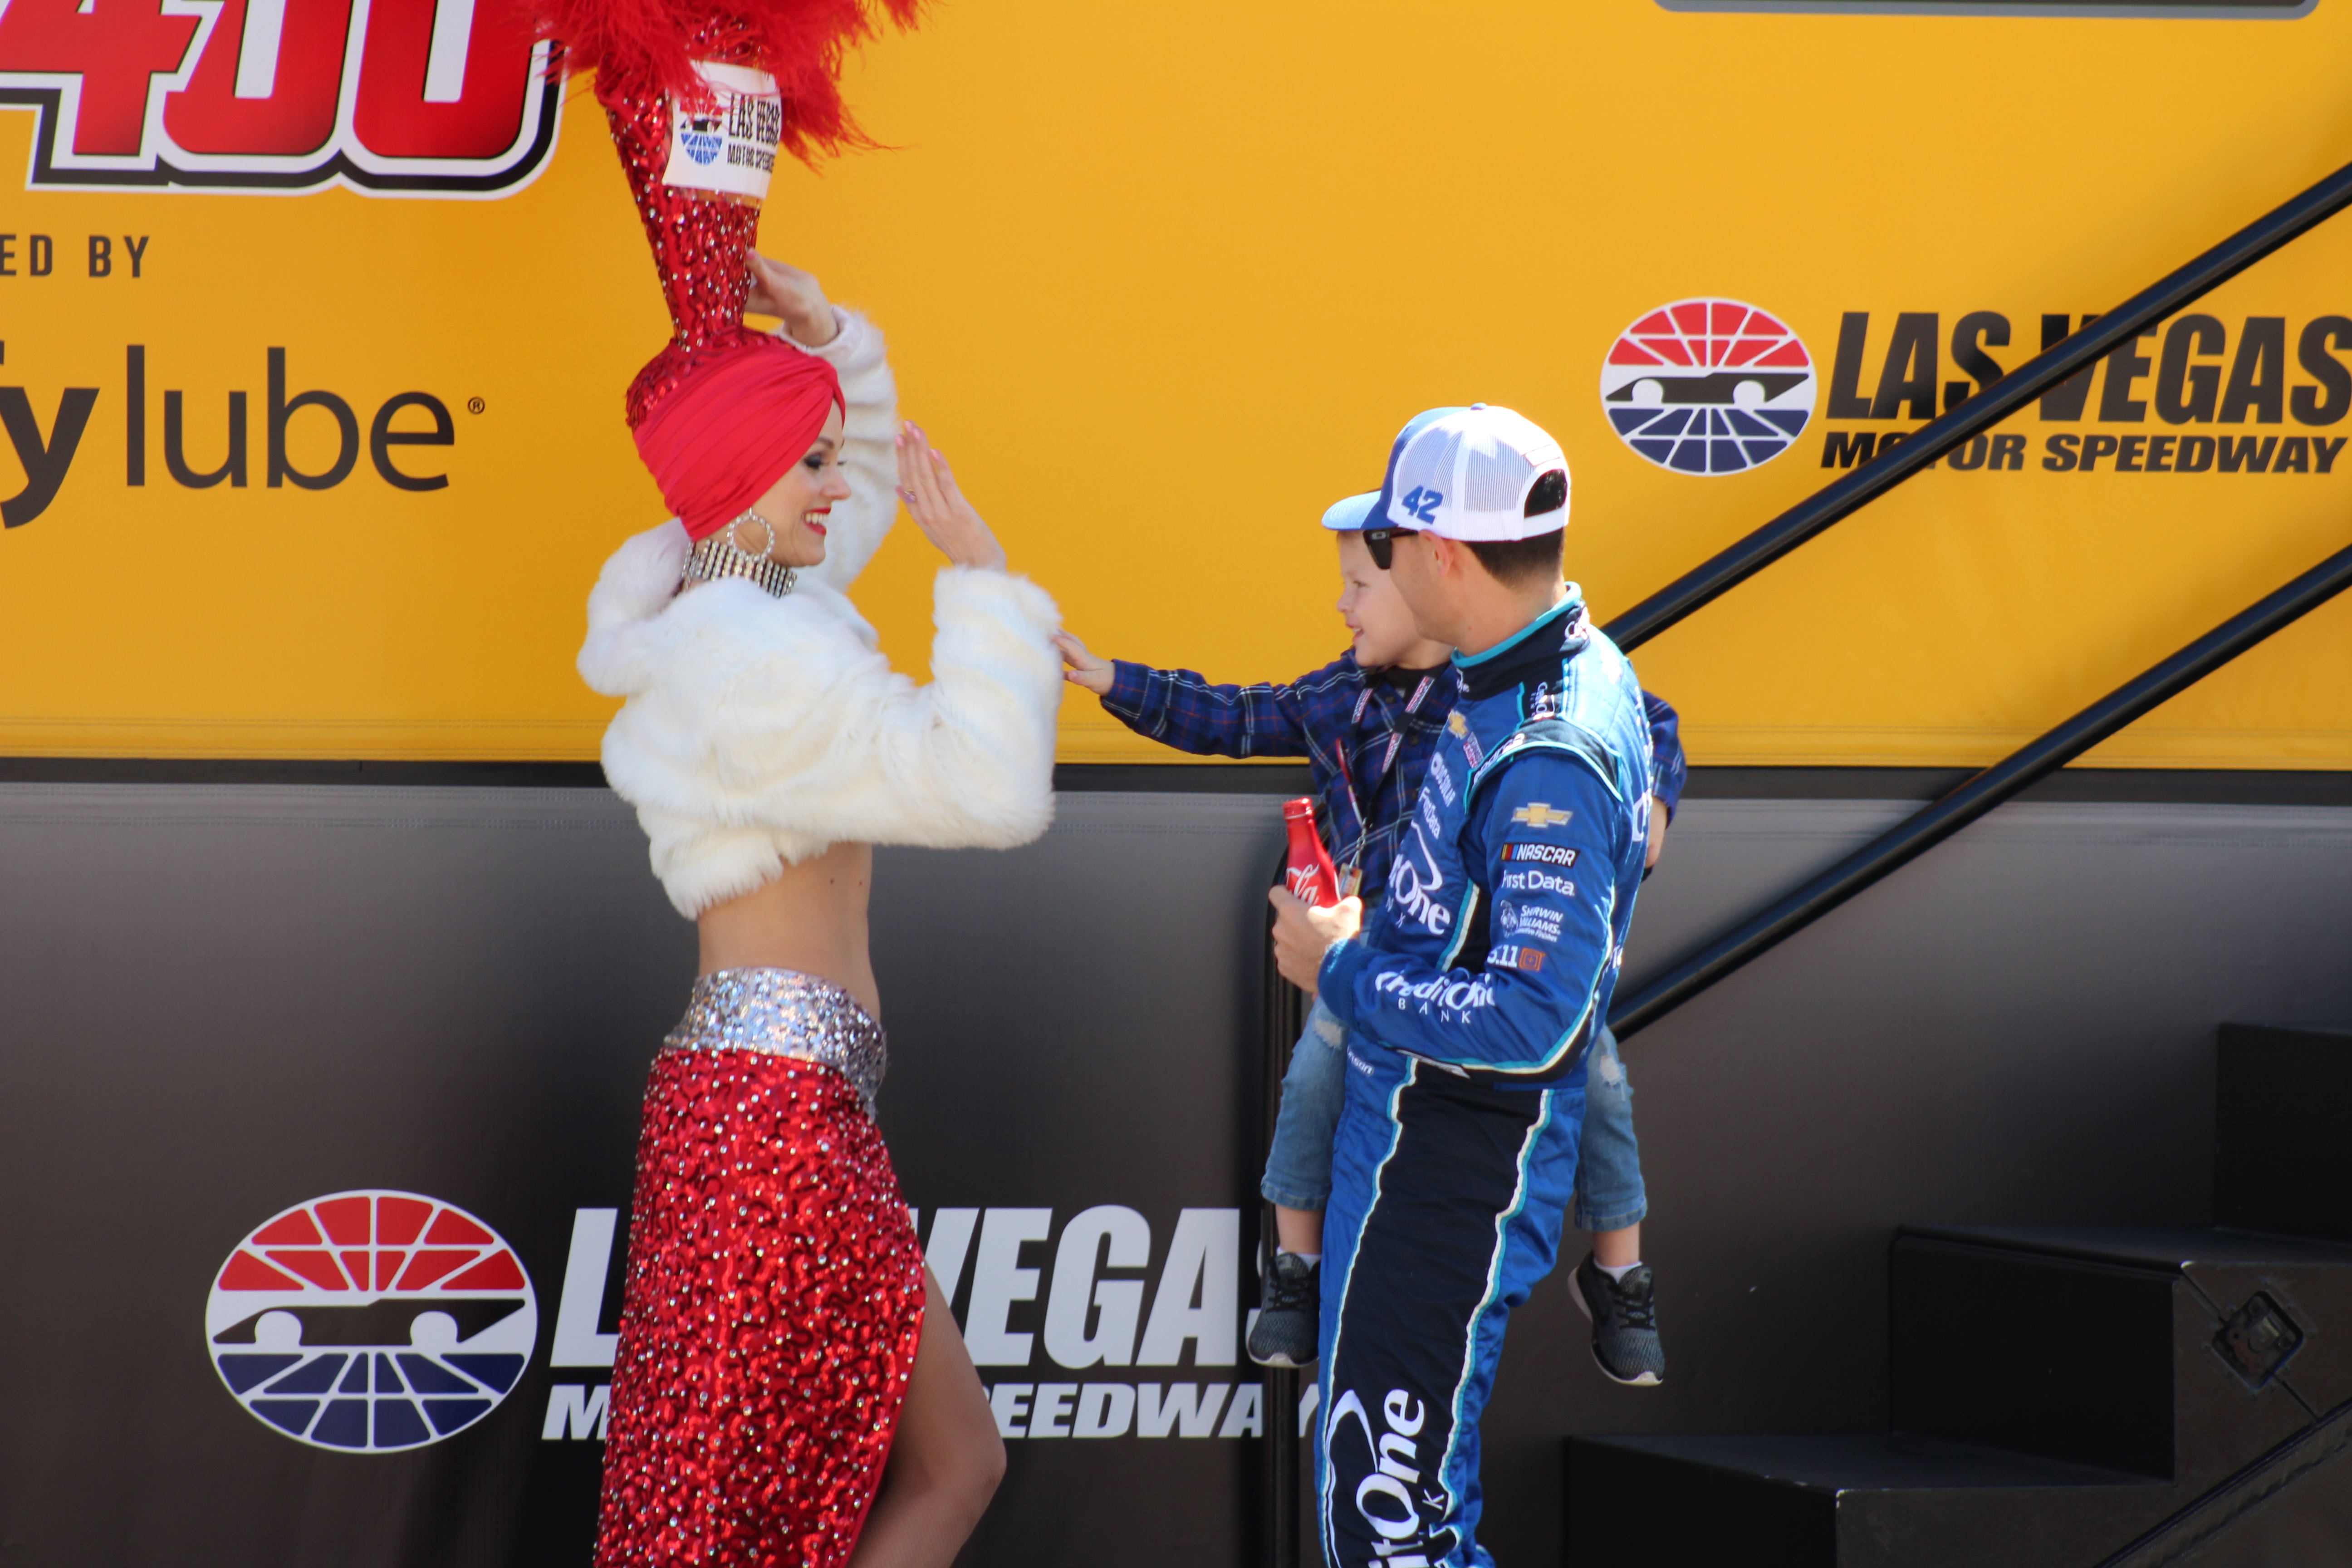 Kyle and Owen Larson get a lucky Las Vegas high five prior to the Pennzoil 400. (Photo Credit: Jose L. Acero Jr/TPF)